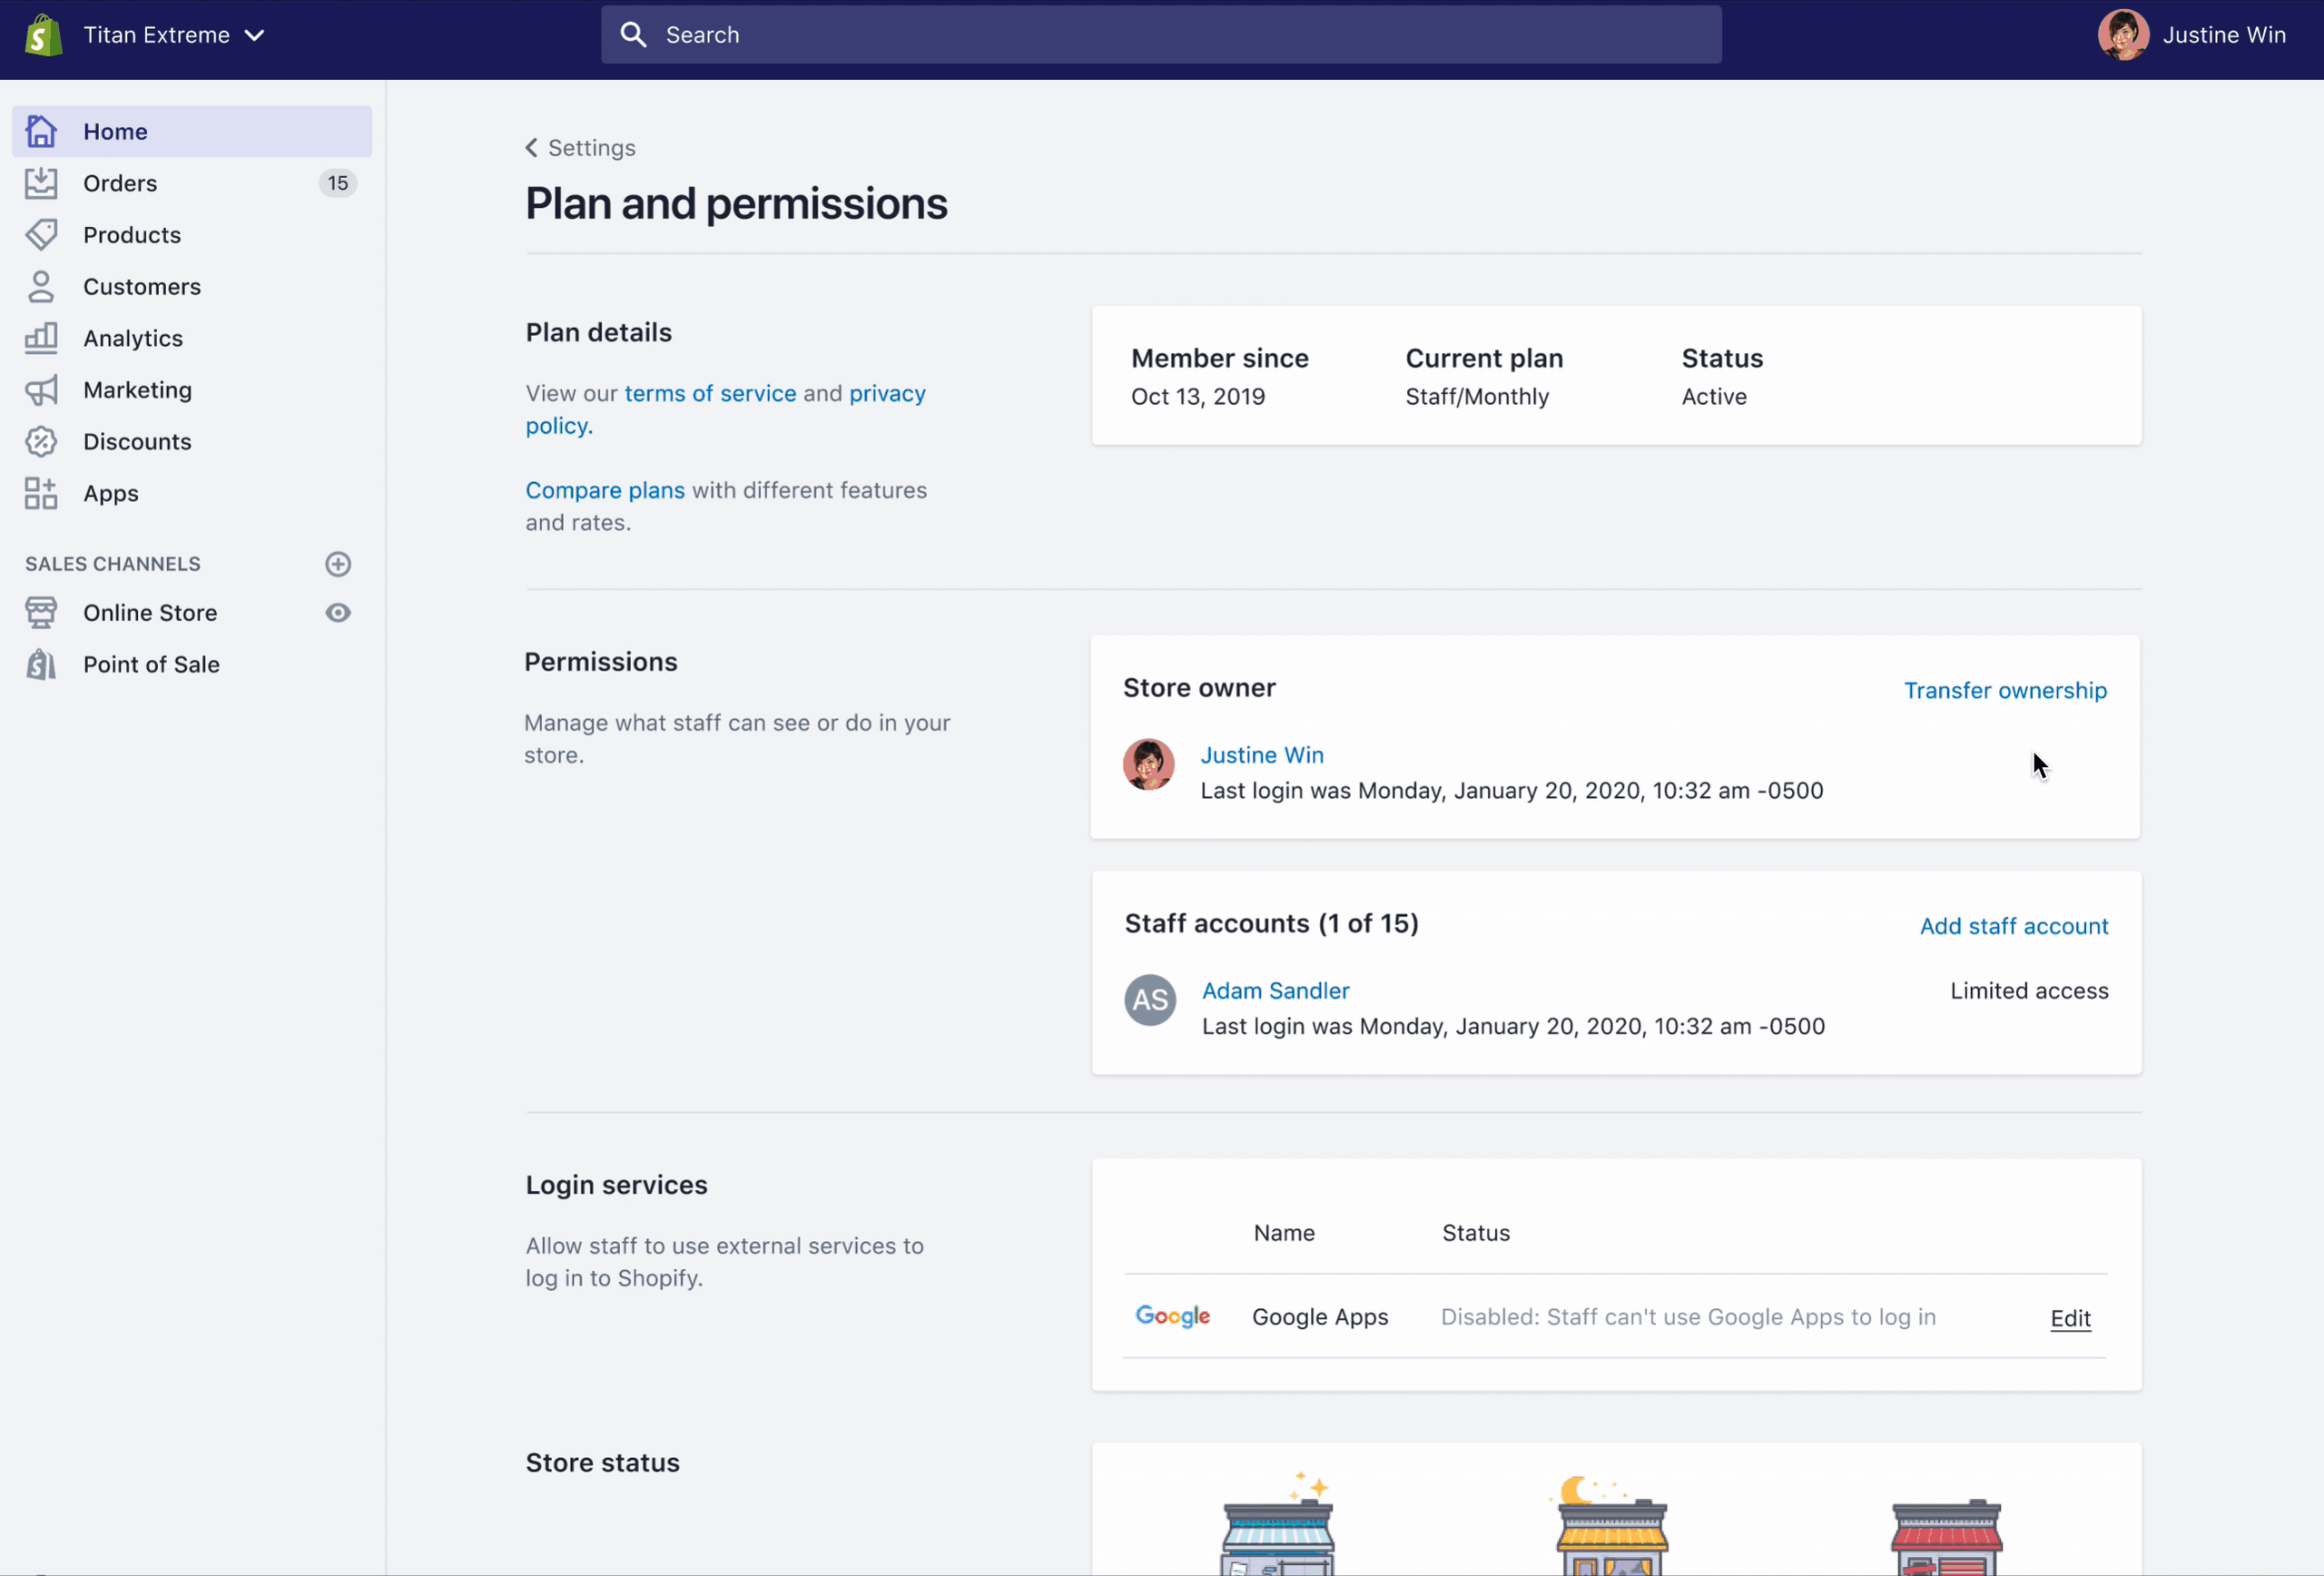 A walkthrough screenshot of the workflow for inviting a new store owner.